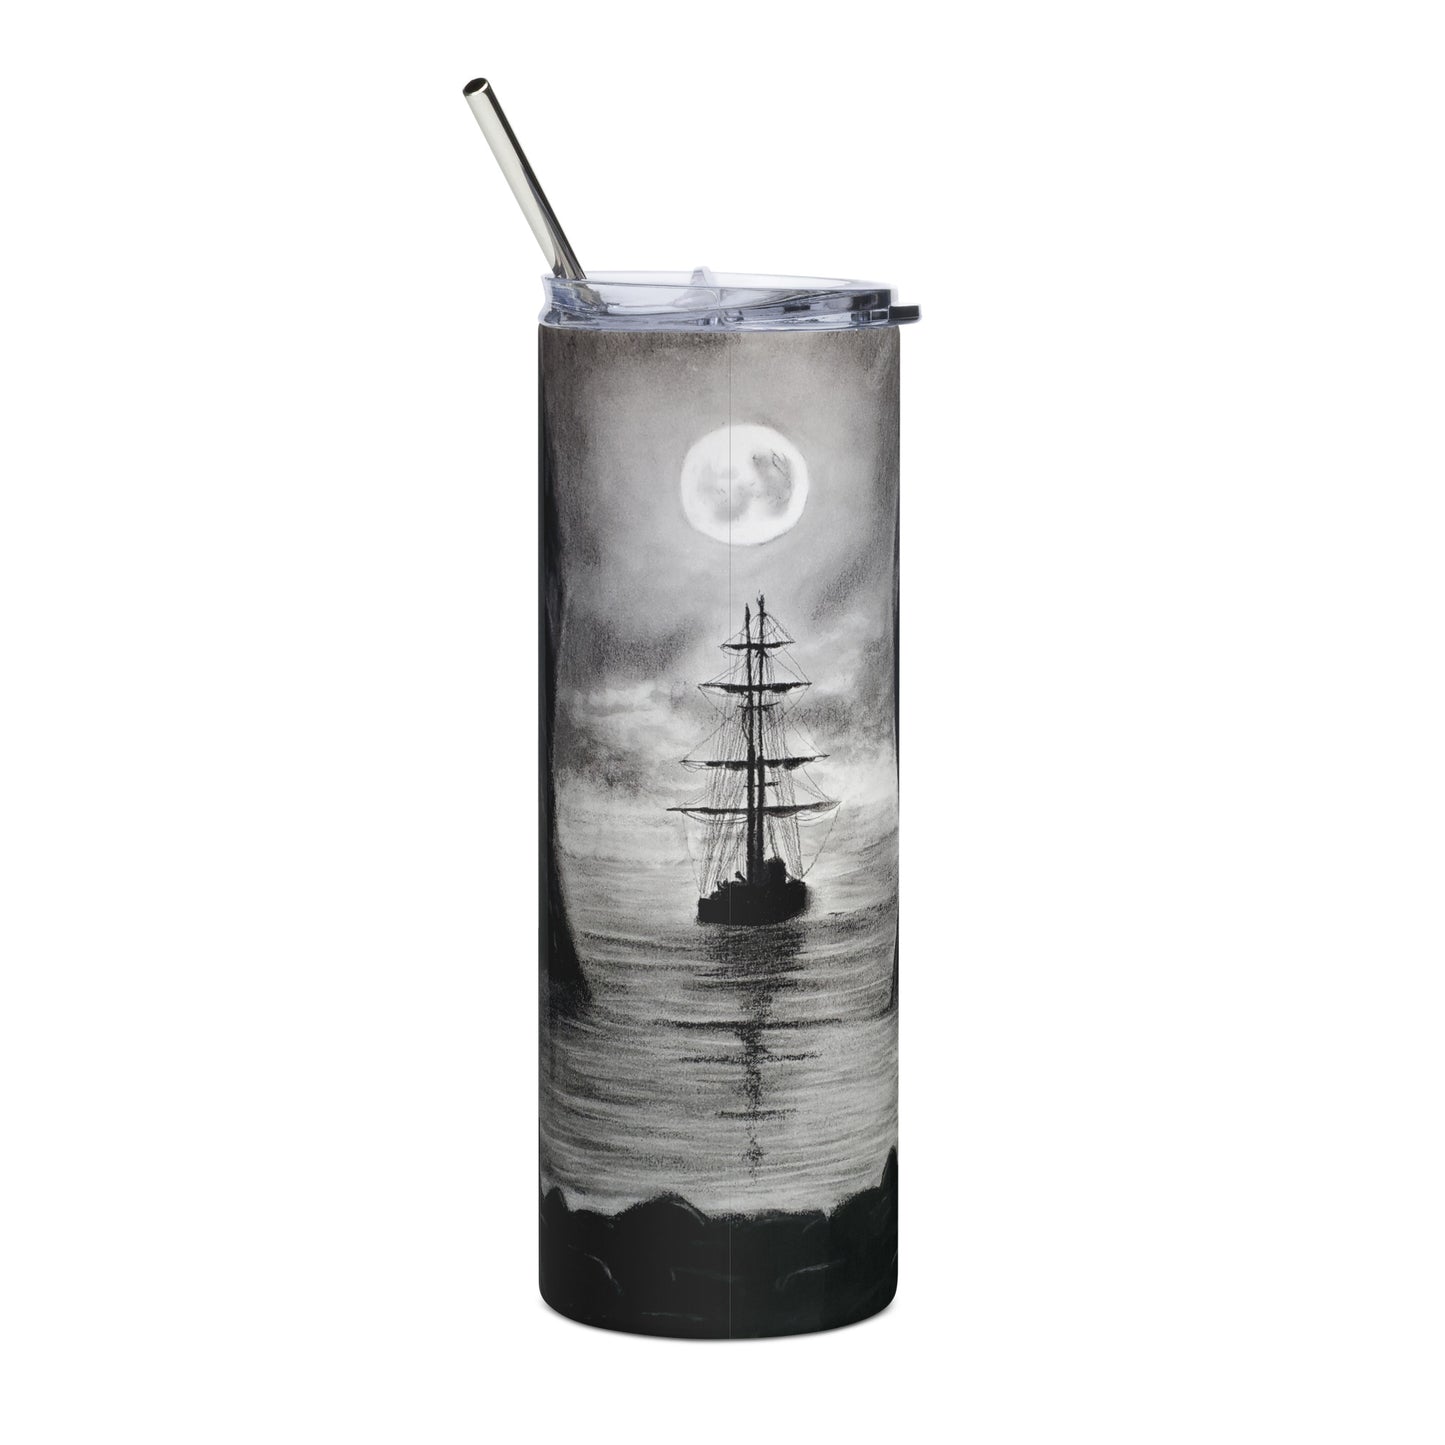 Spooky Pirate Ship Stainless steel tumbler